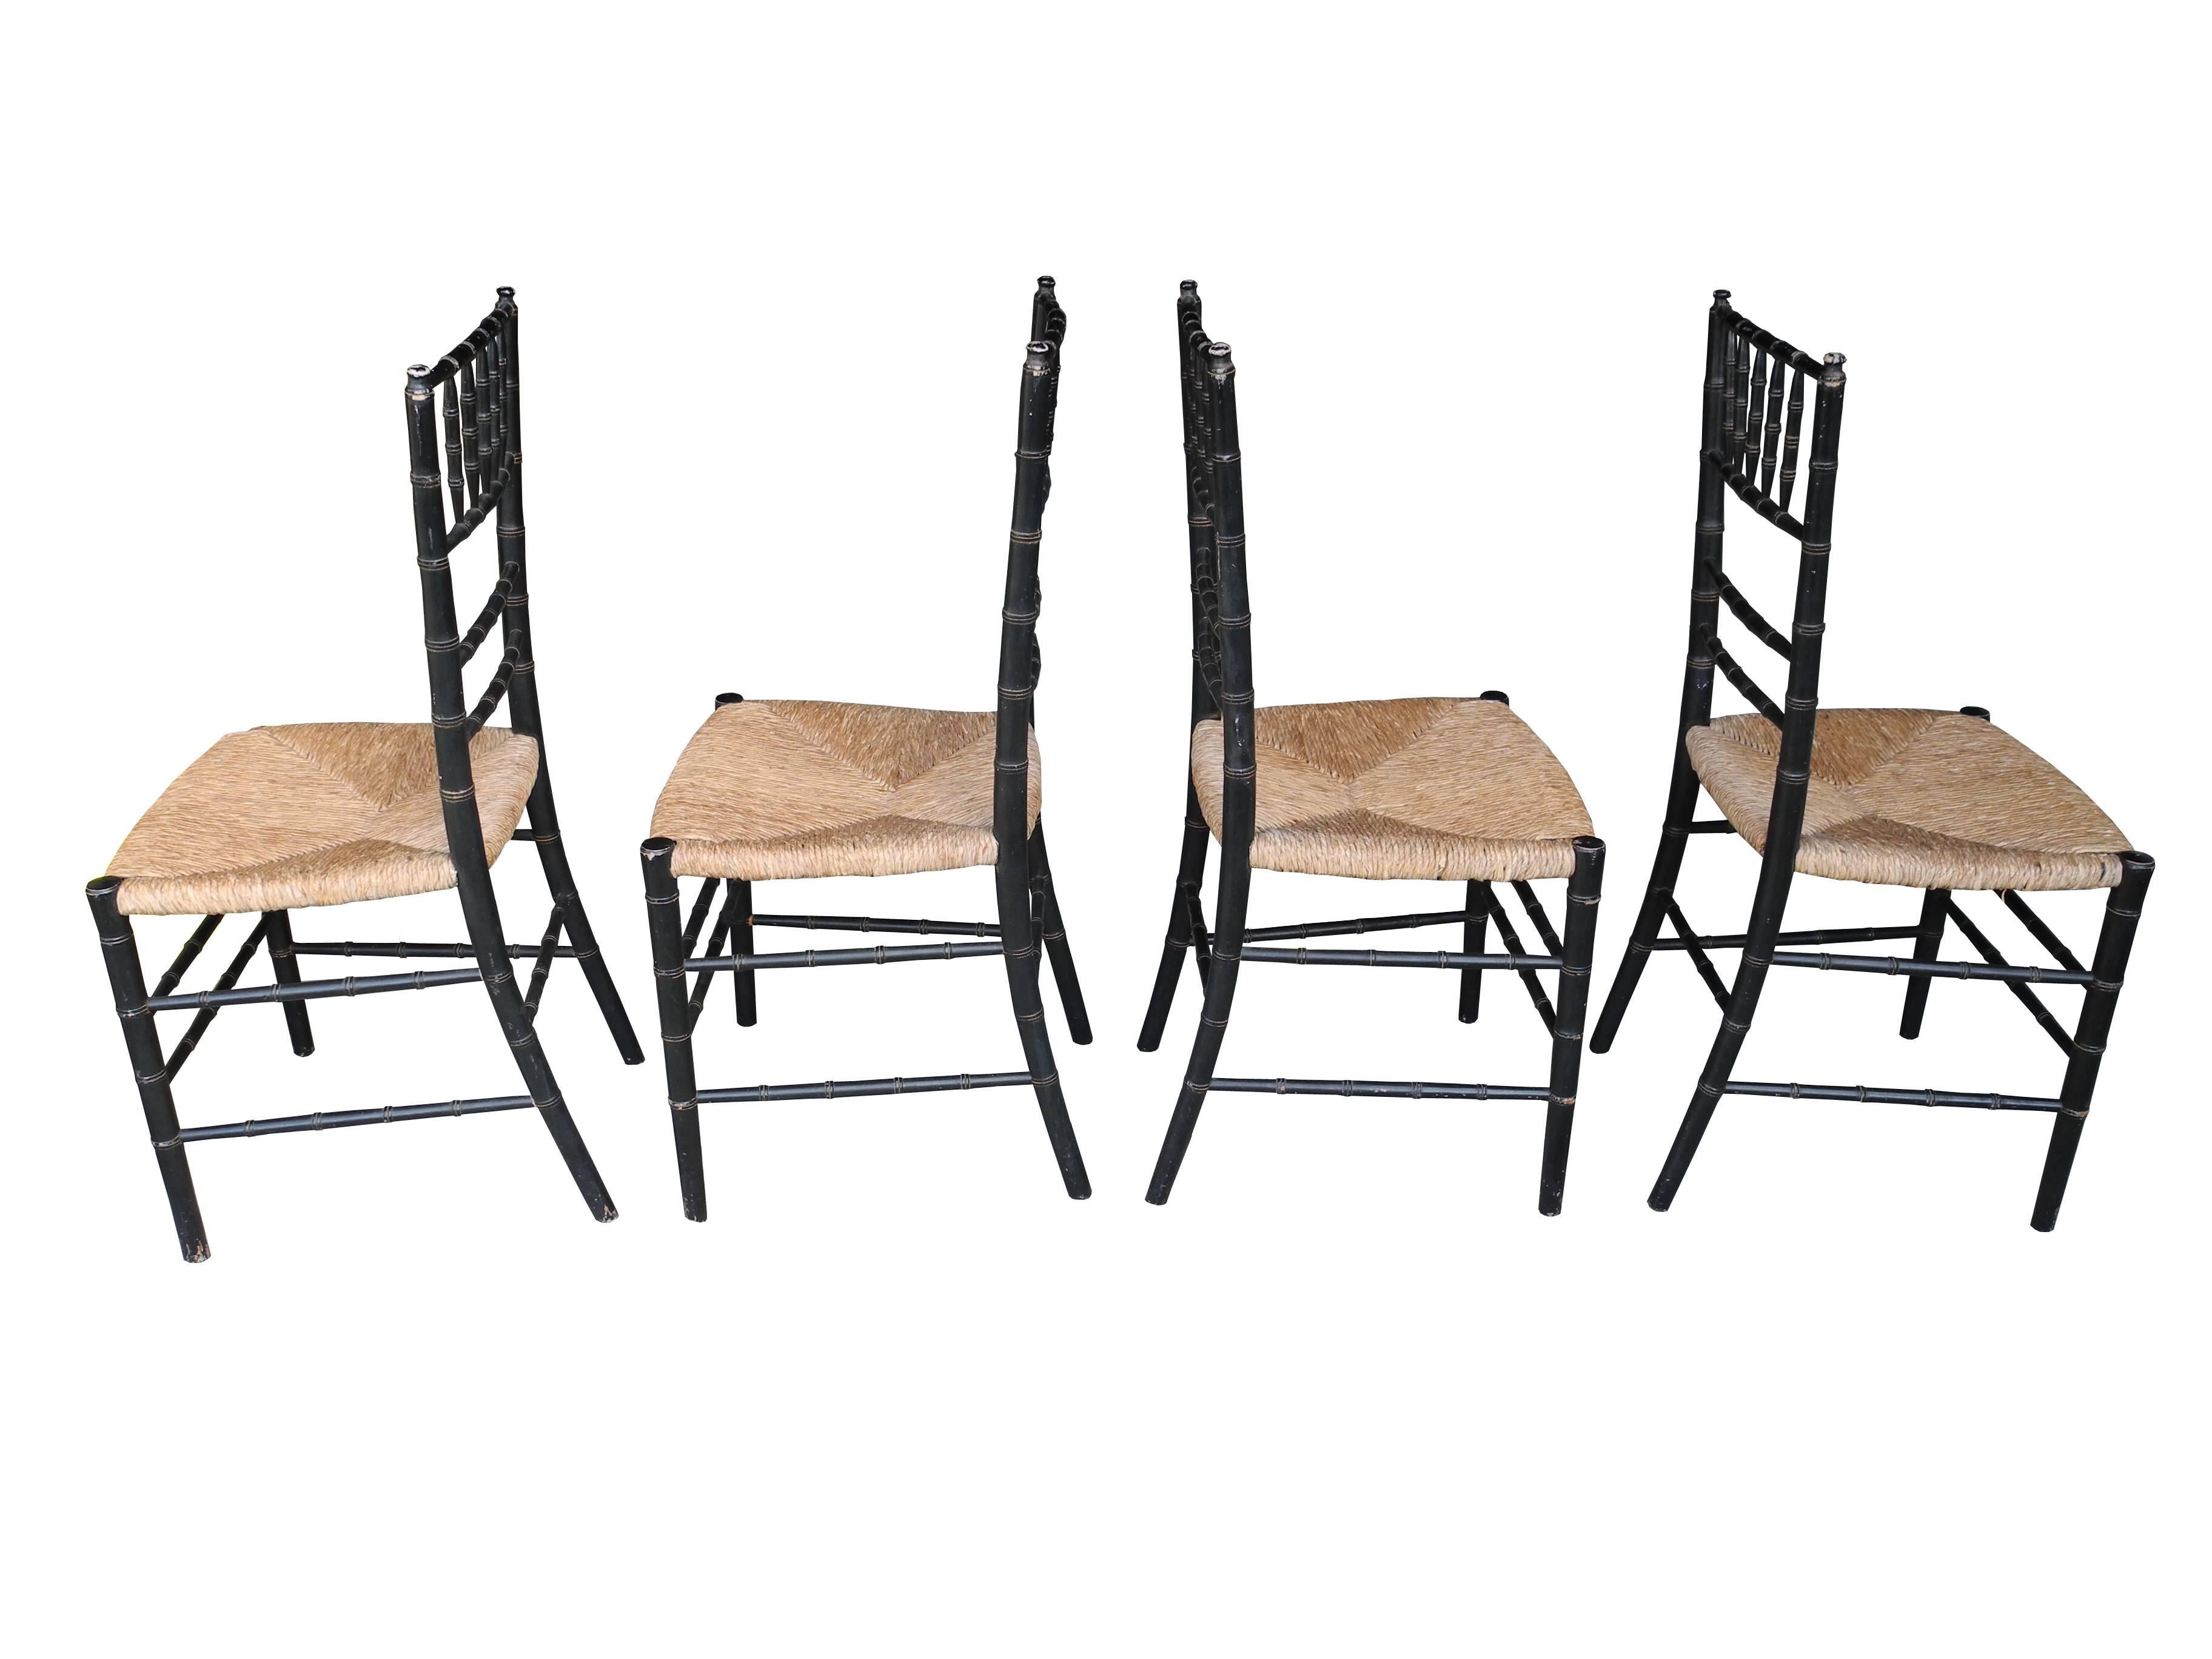 This set of four faux bamboo chairs are made of painted wood frames and rush seats. Slight patina and wear to the frames give them that extra vintage charm.